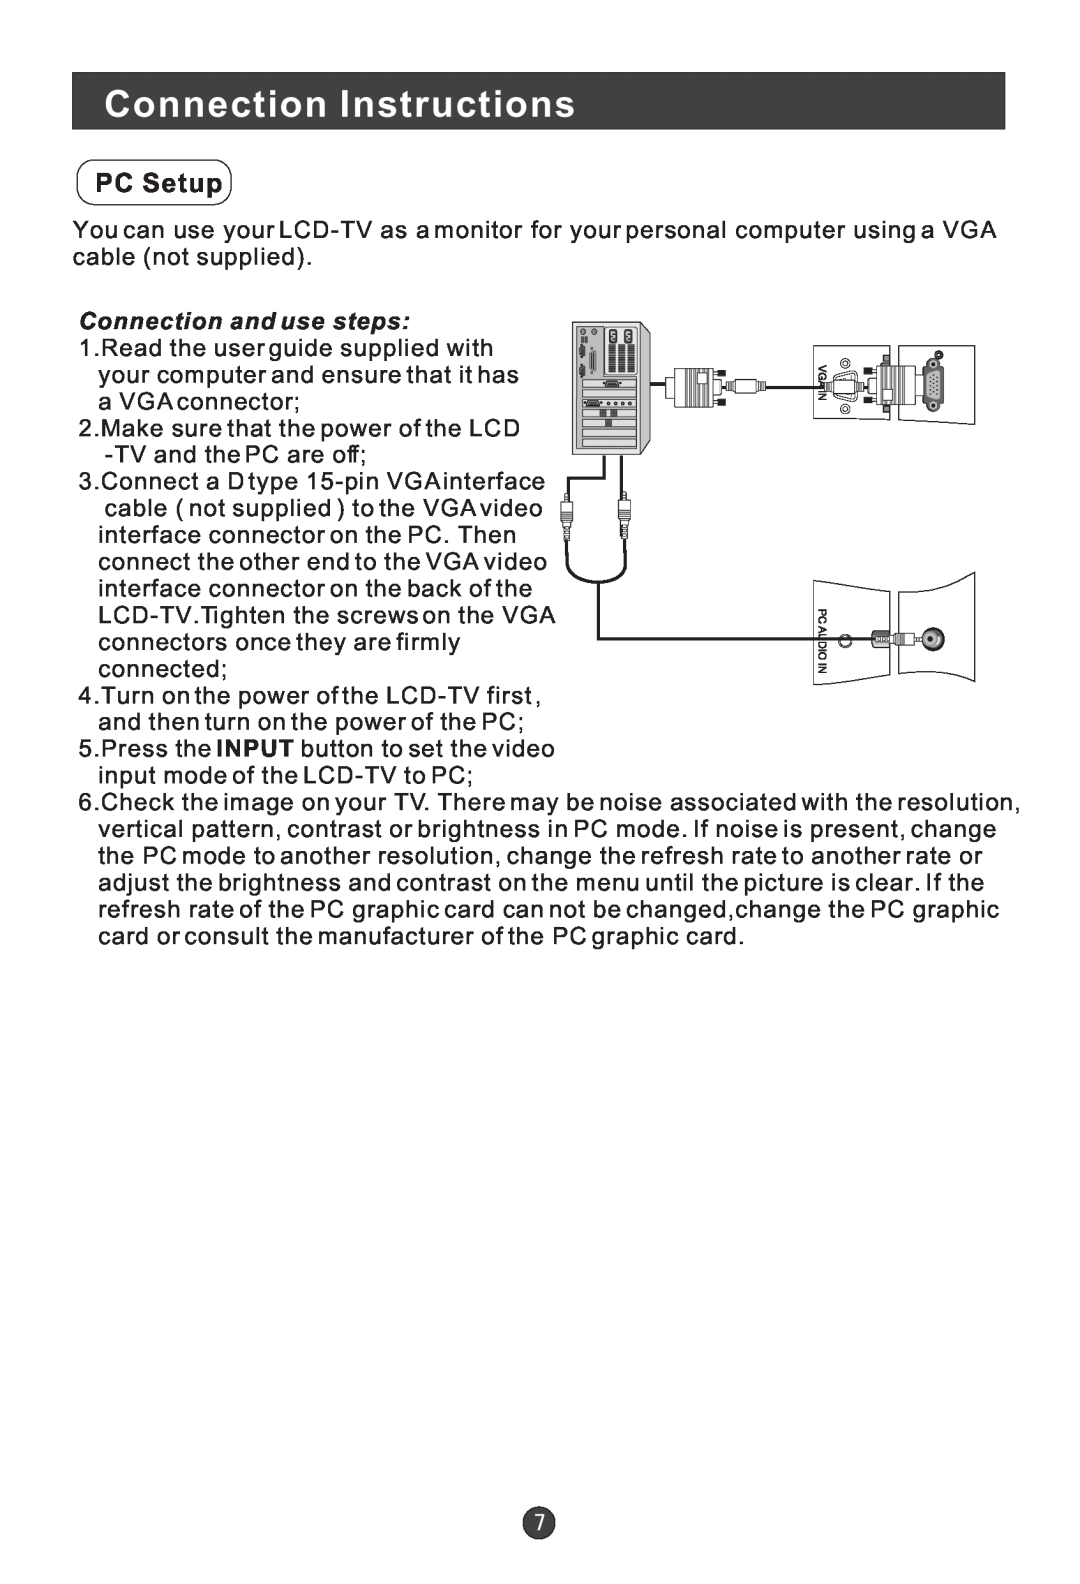 Haier HL15B user manual Connection Instructions, PC Setup, Connection and use steps 